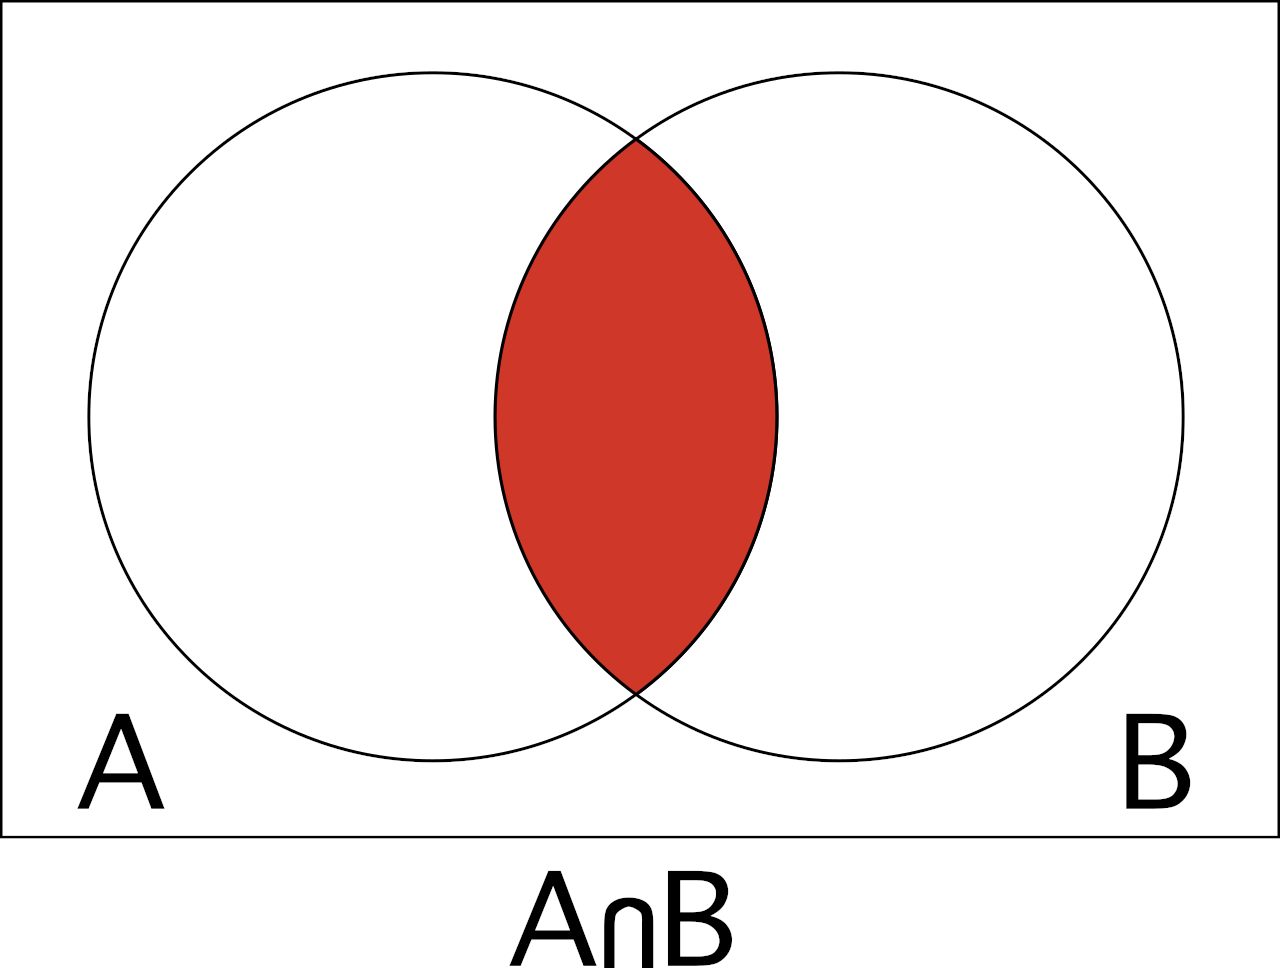 Venn diagram to help visualize the intersection of A and B